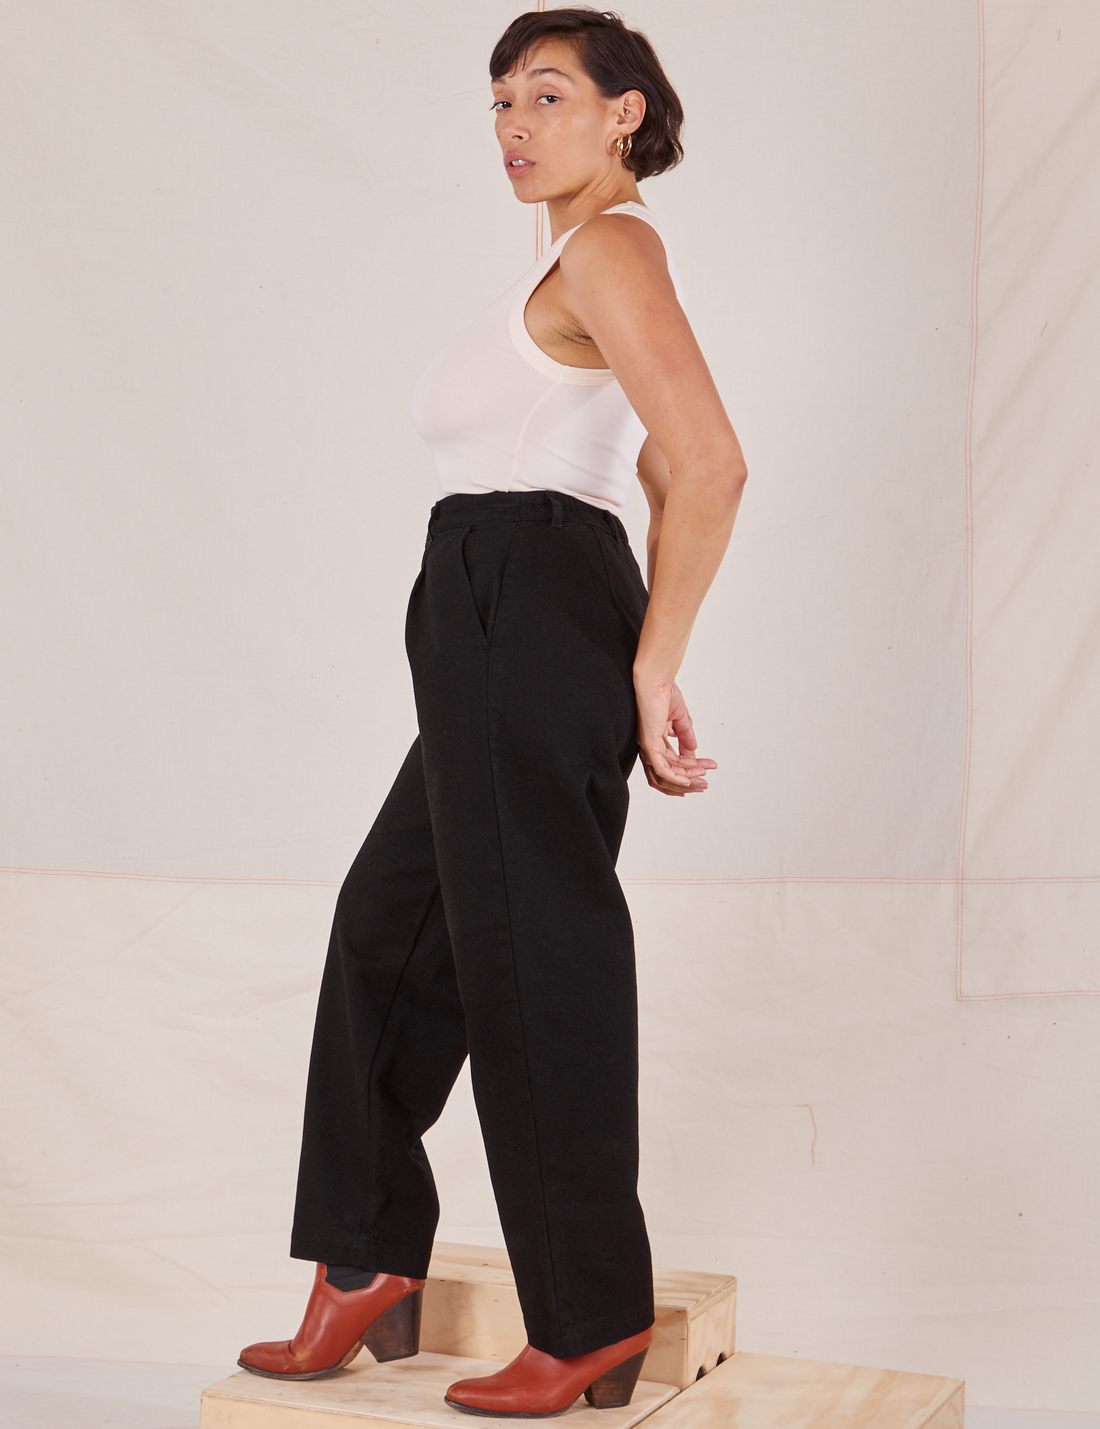 Side view of Denim Trouser Jeans in Black and vintage off-white Tank Top worn by Tiara.